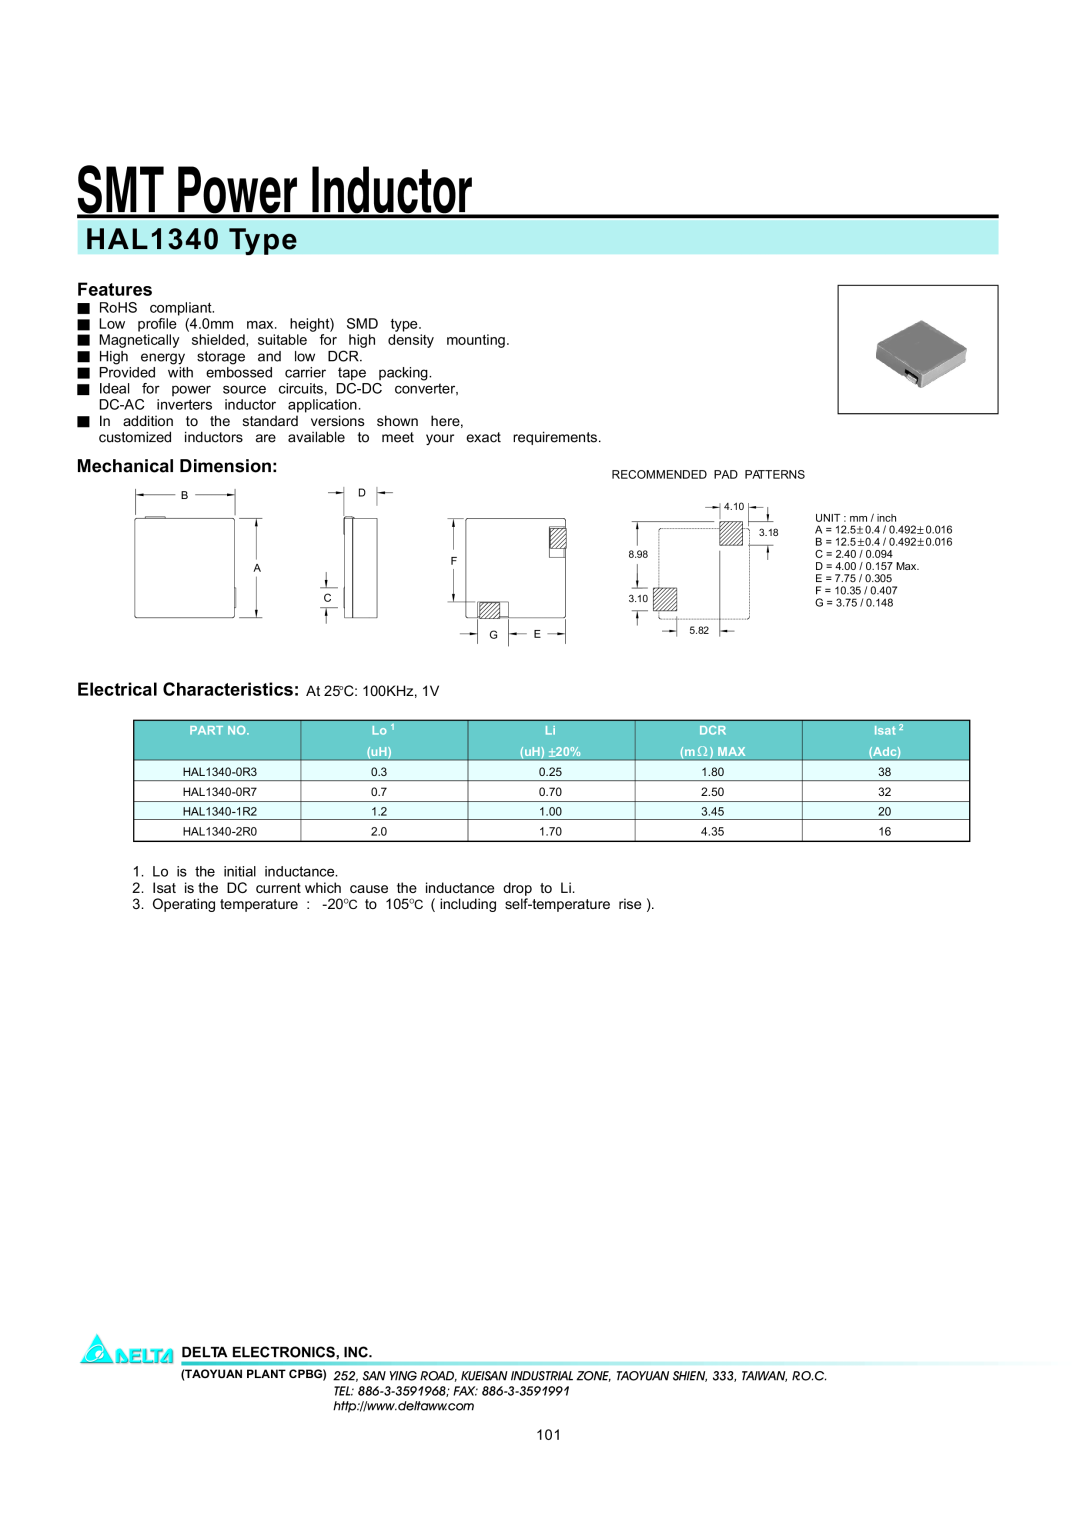 Delta Electronics manual SMT Power Inductor, HAL1340 Type, Features, Mechanical Dimension, Delta Electronics, Inc 